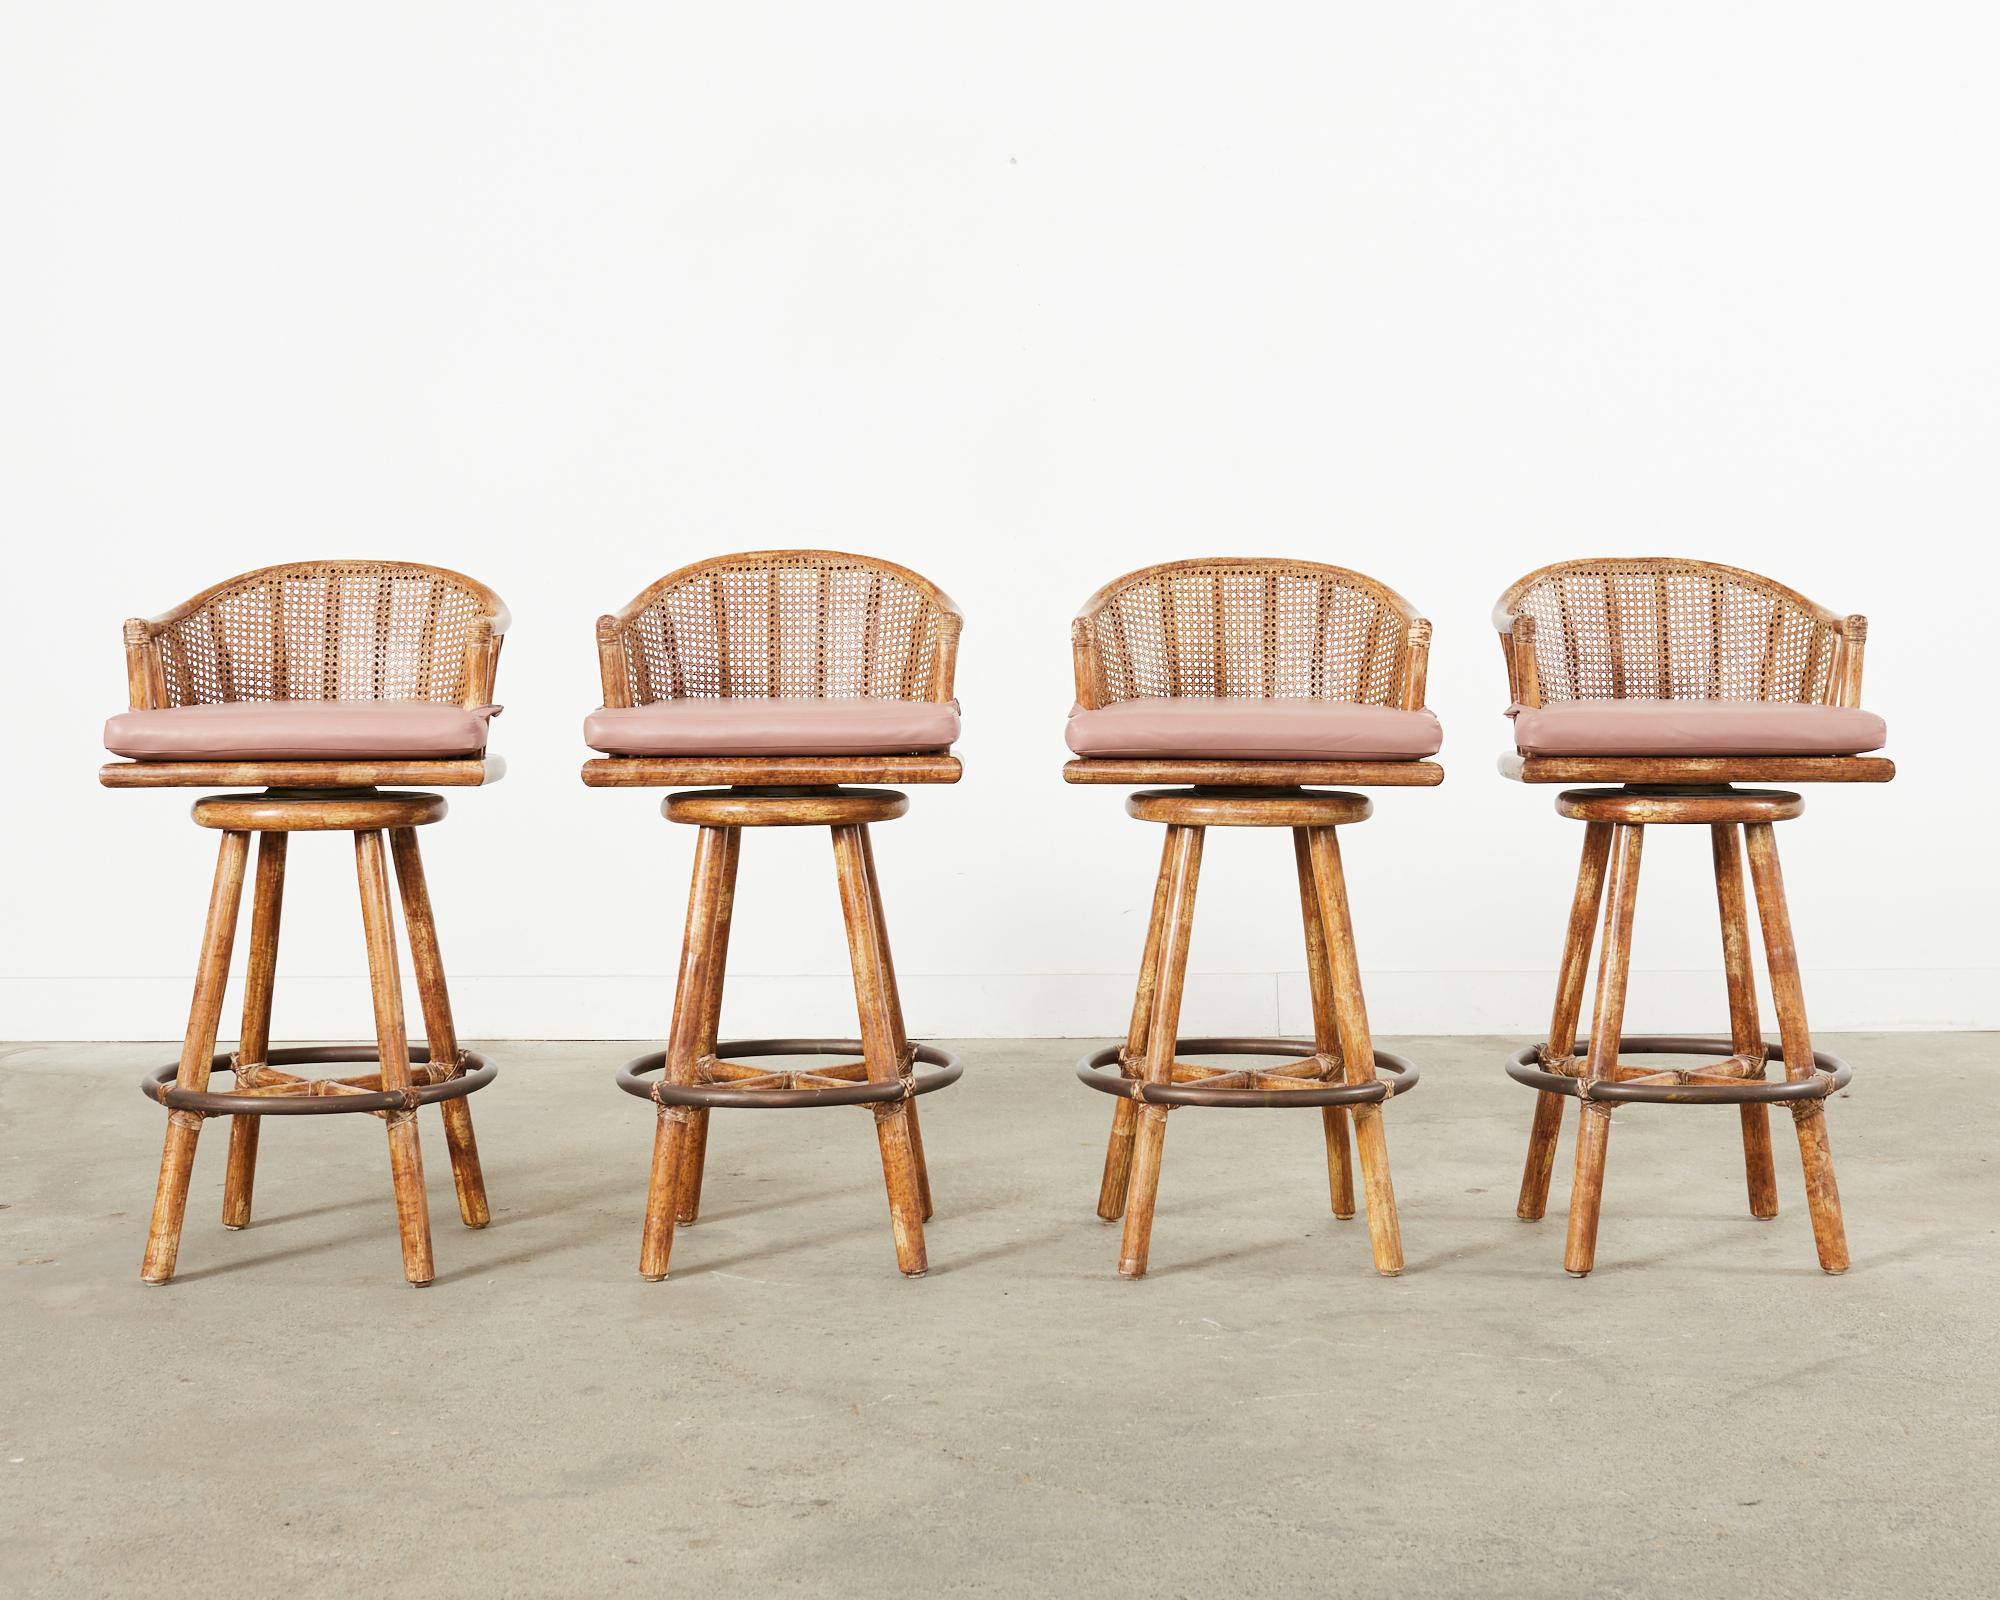 Handsome set of four rattan and oak barstools made in the California coastal organic modern style by McGuire, San Francisco. The bar height stools feature a solid rattan and oak frame with a swivel seat. The generous seats have a gracefully curved